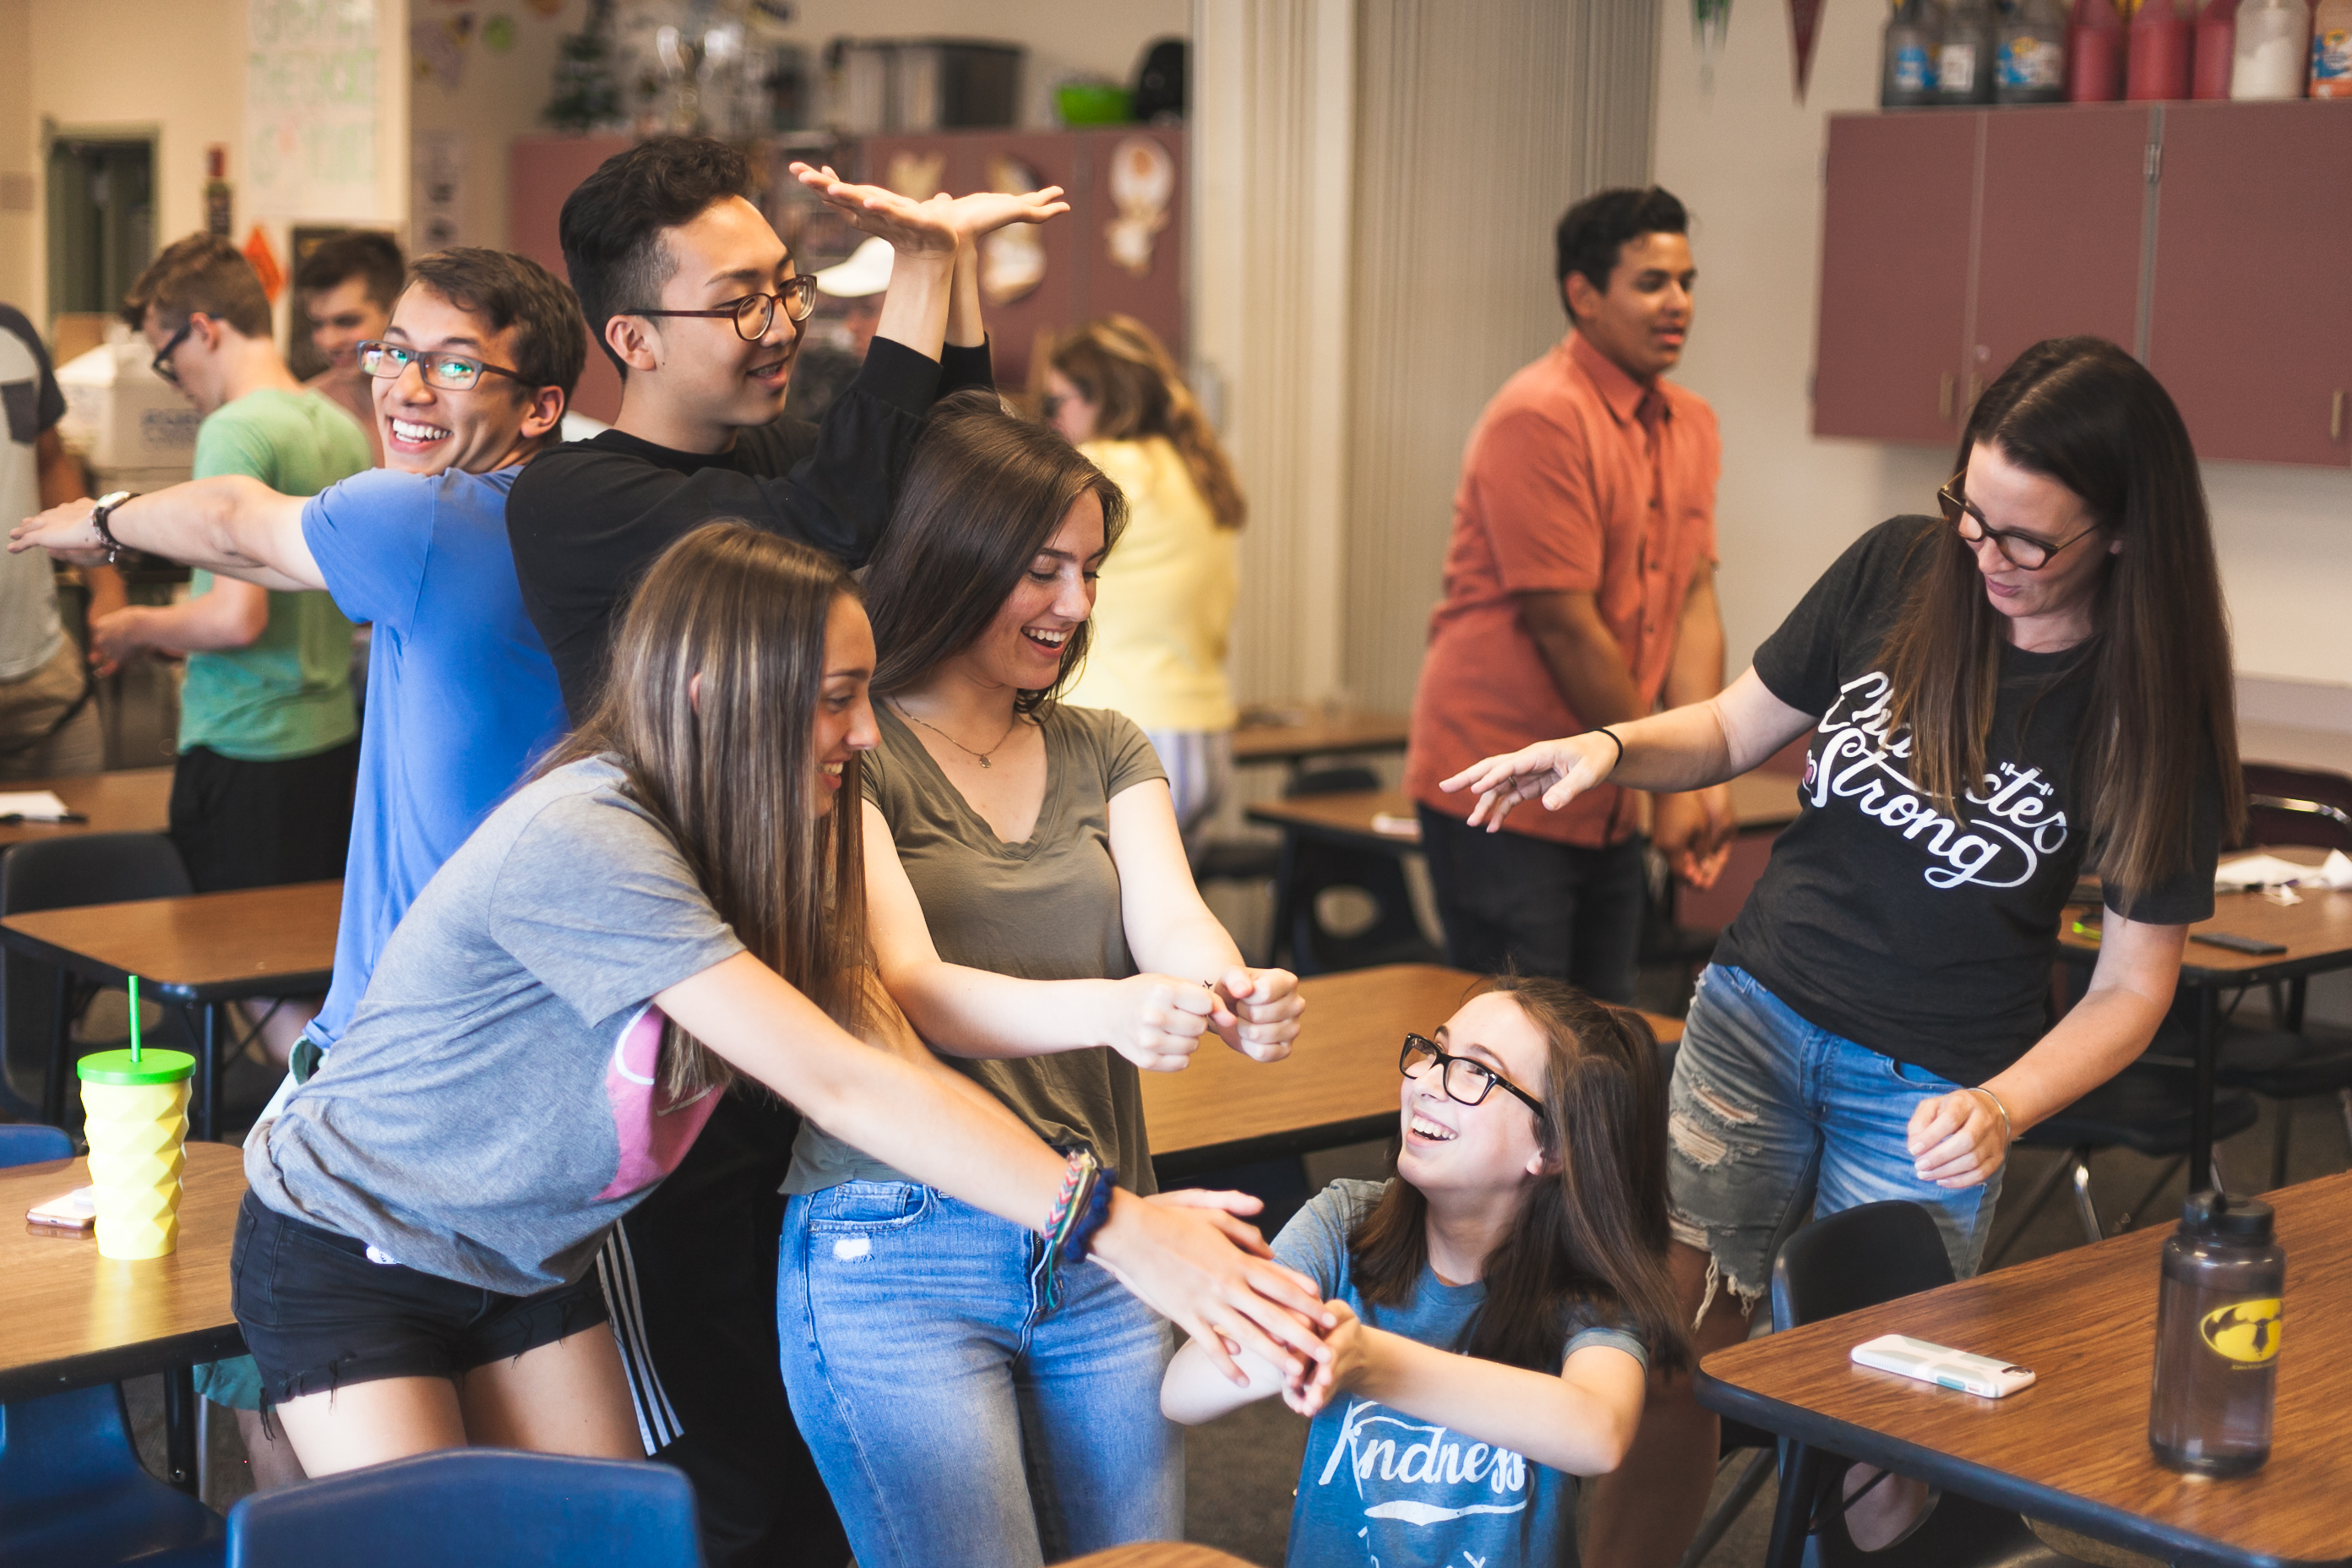 A group of smiling middle school students act out various motions and positions in a group activity